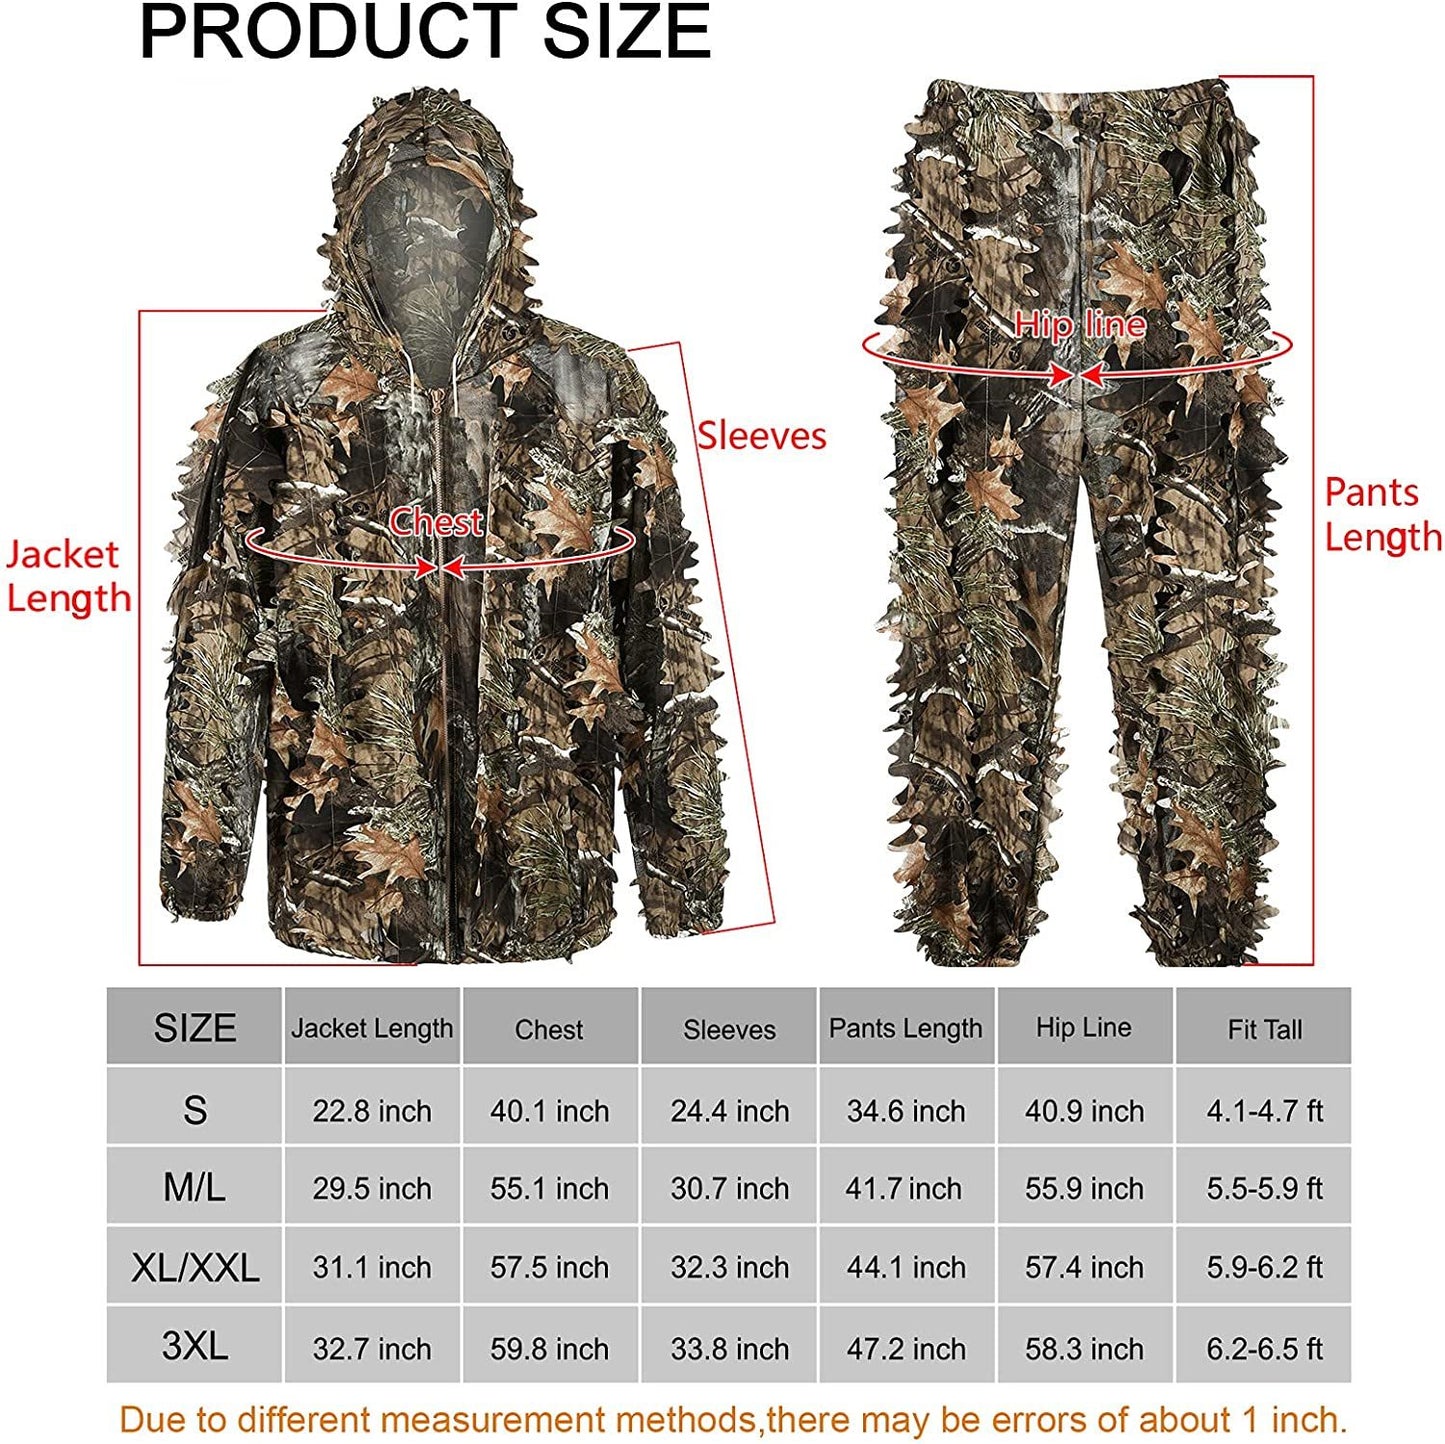 Kylebooker 3D Bionic Maple Leaf Hunting Ghillie Suit Camouflage Sniper Clothing